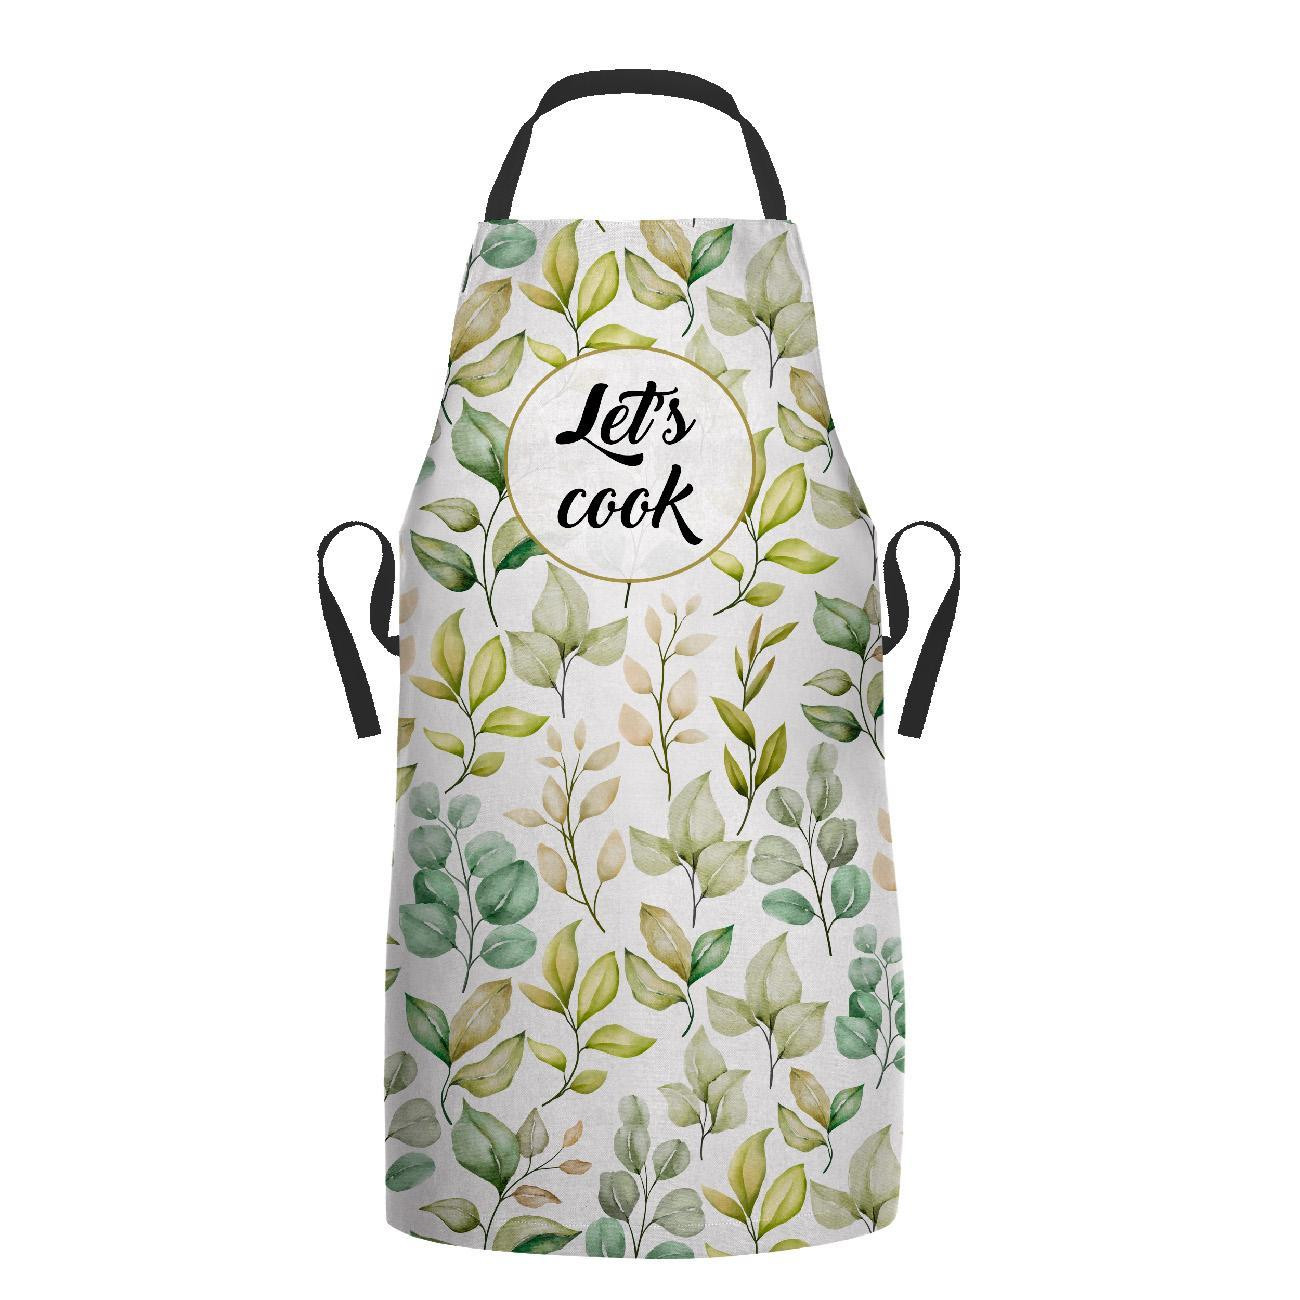 APRON - LET'S COOK - sewing set